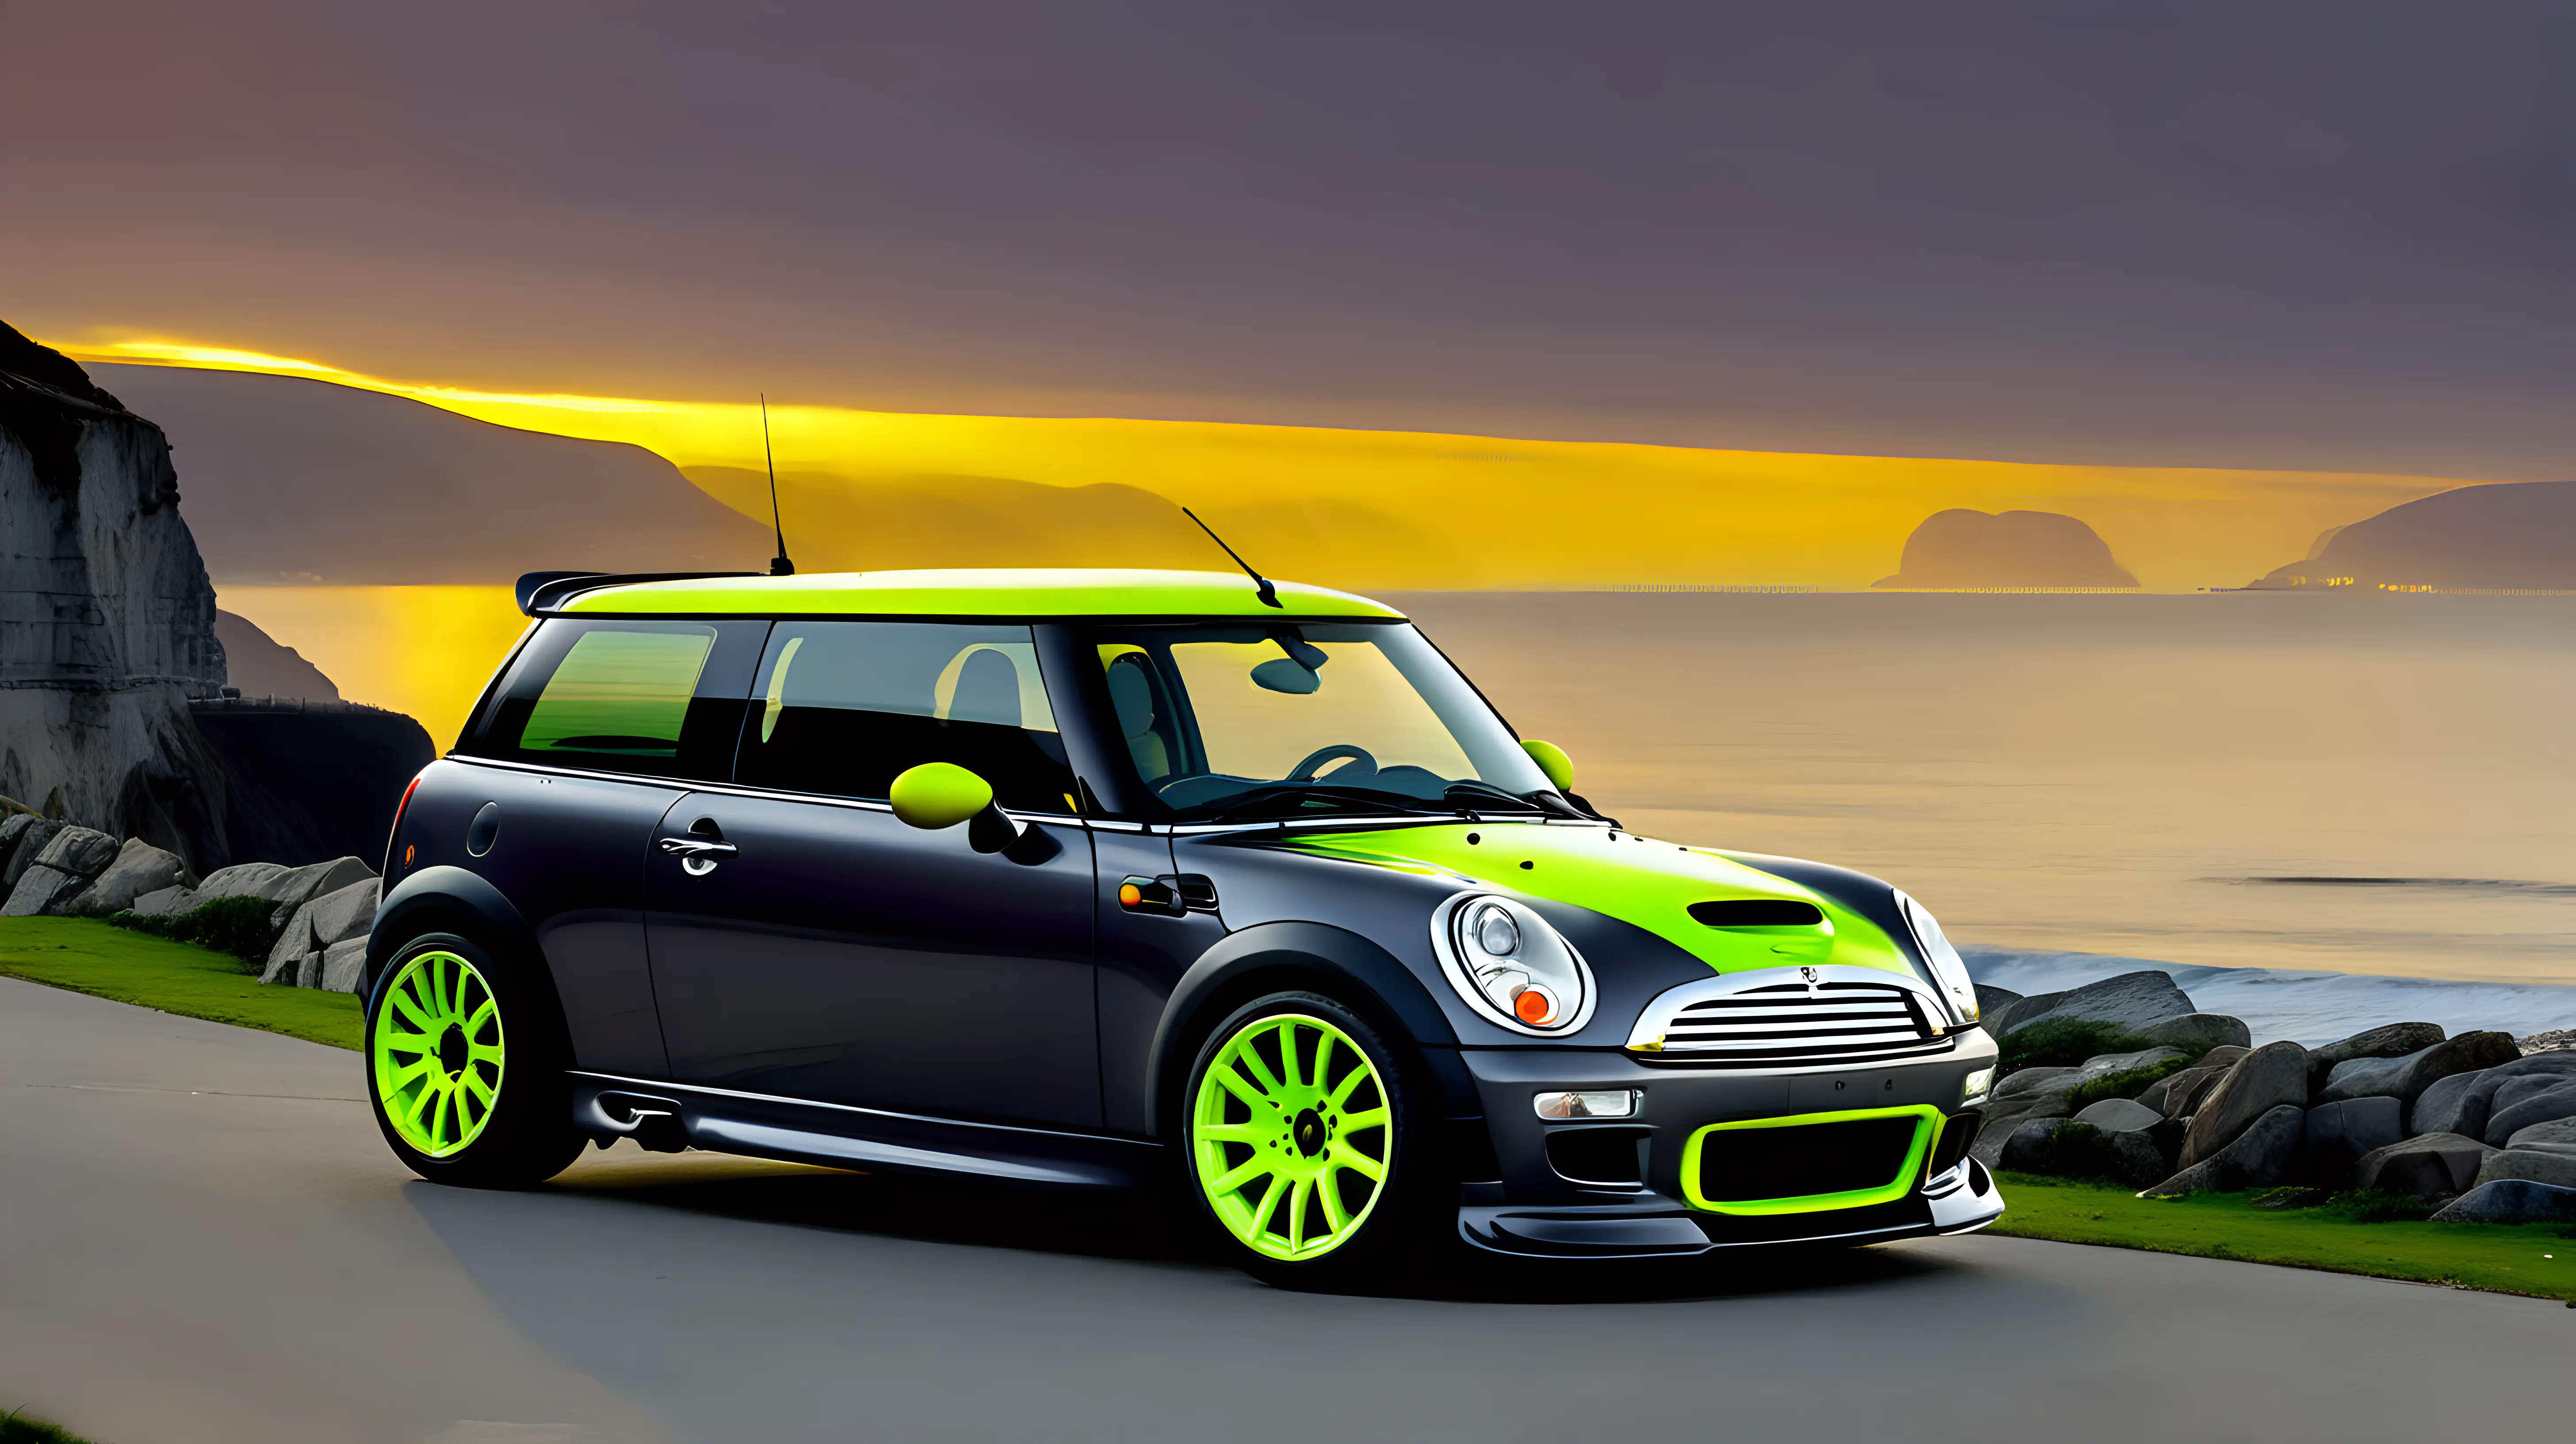 MINI R53 Dark Grey and Neon Yellow Sunset on Cliff by the Sea